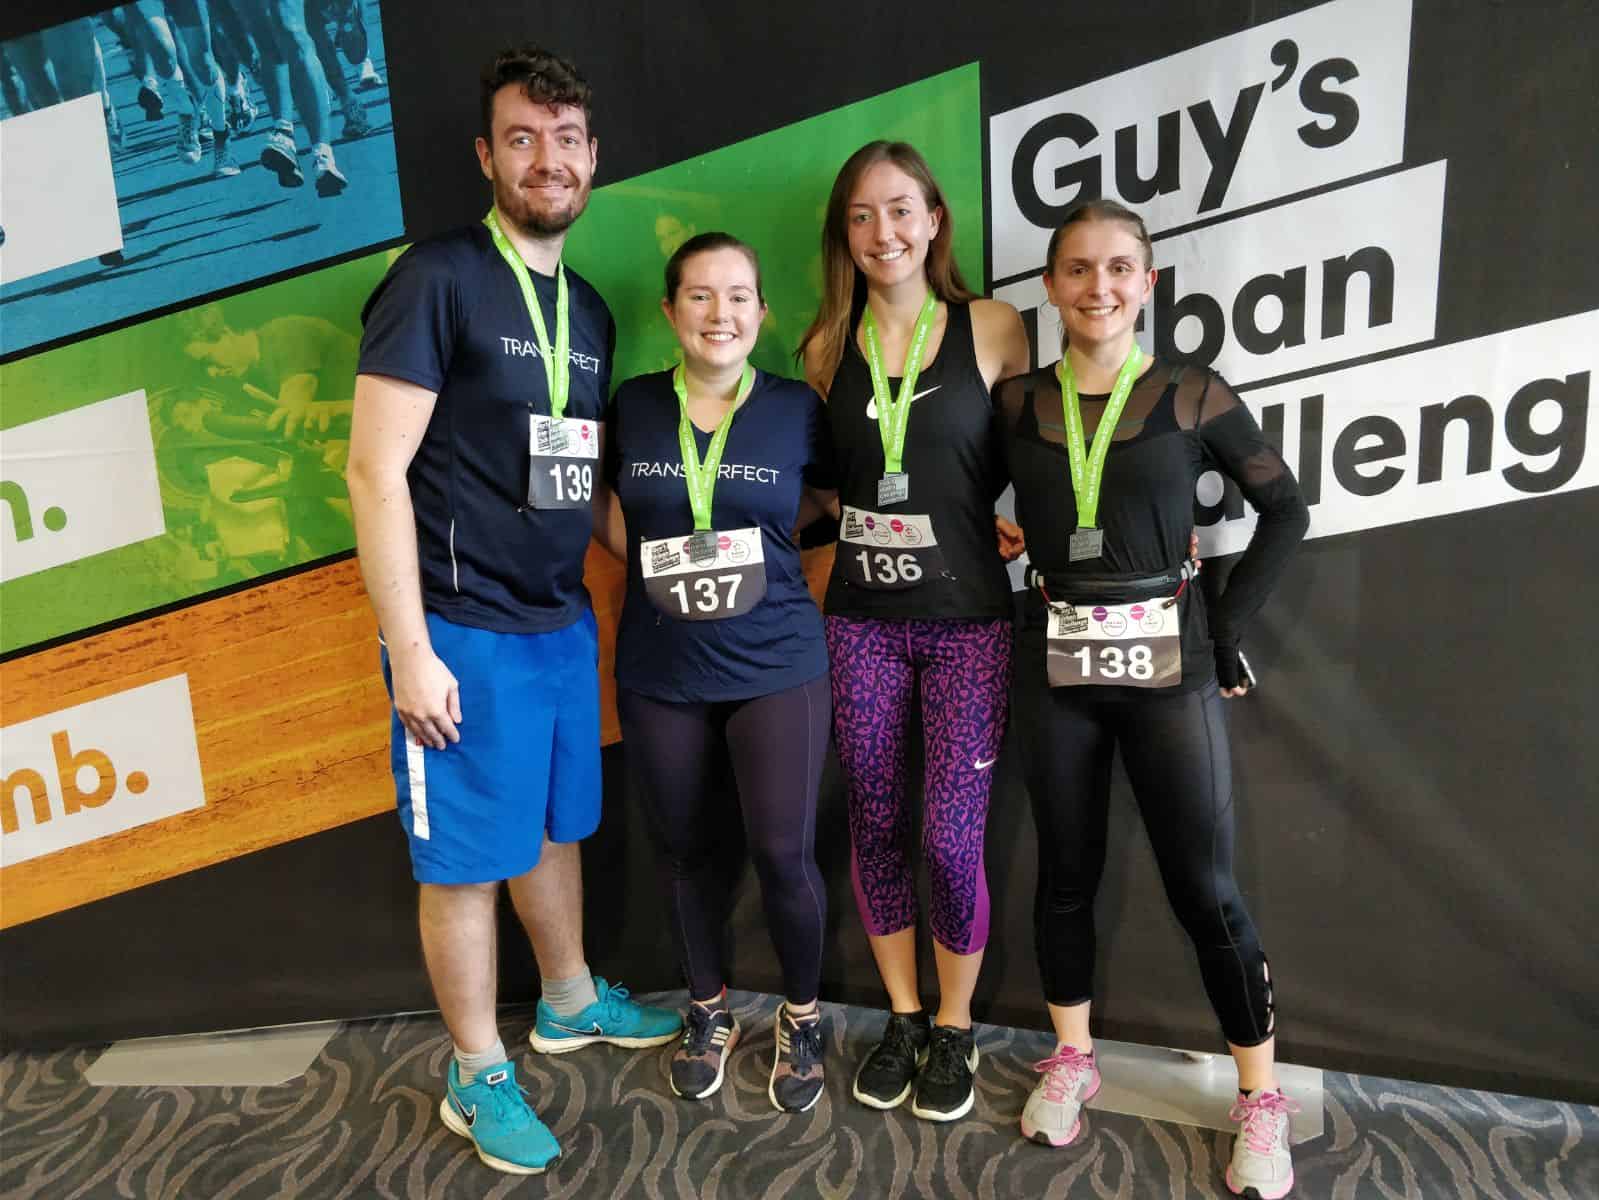 James Powell (far left) at the Guy's Challenge fundraiser last year